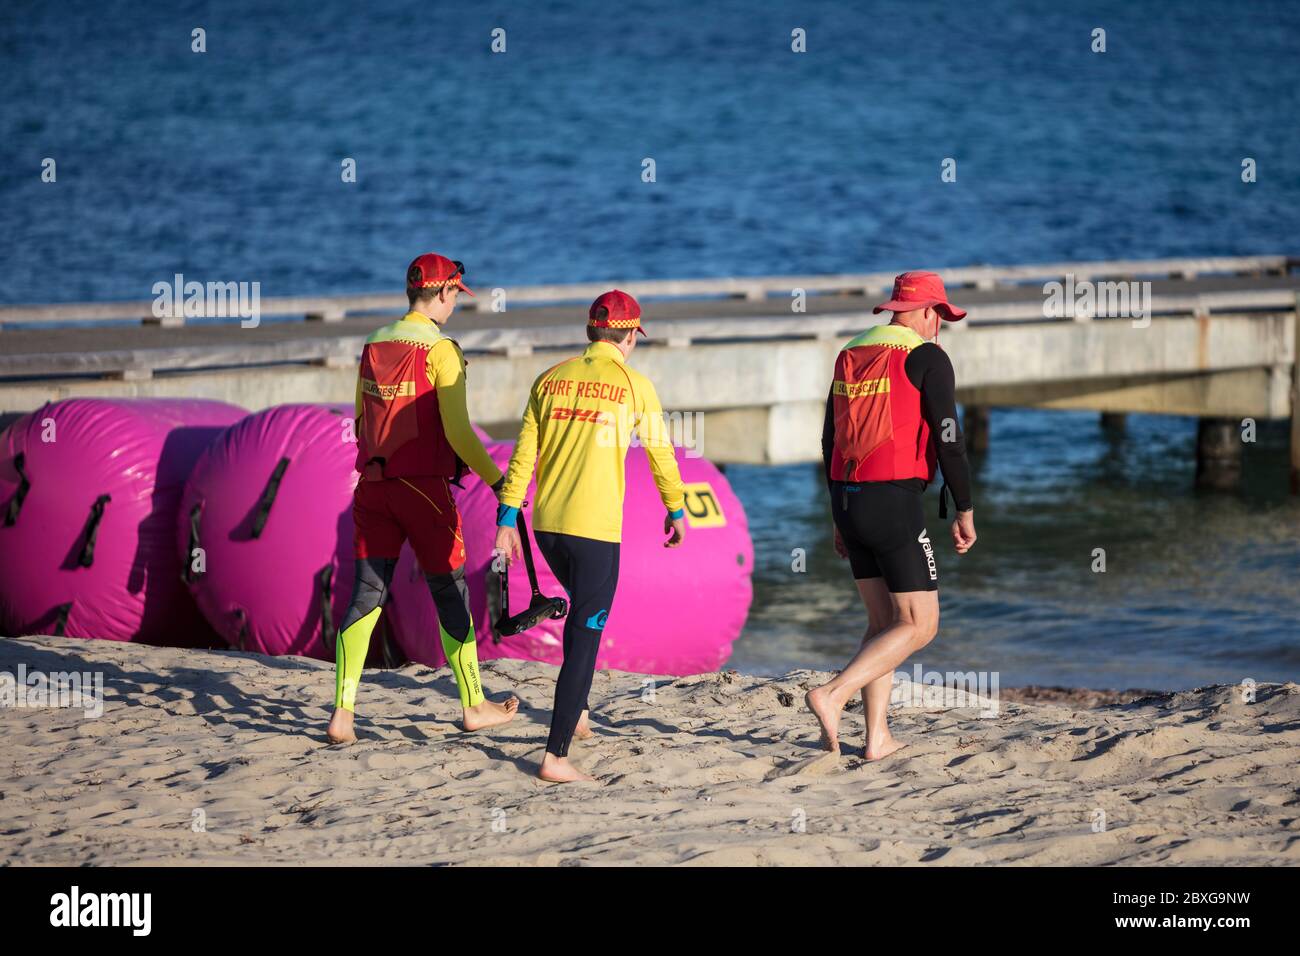 Busselton Western Australia November 9th 2019 : Training exercises being conducted by the younger members of the Busselton Surf Lifesaving club Stock Photo